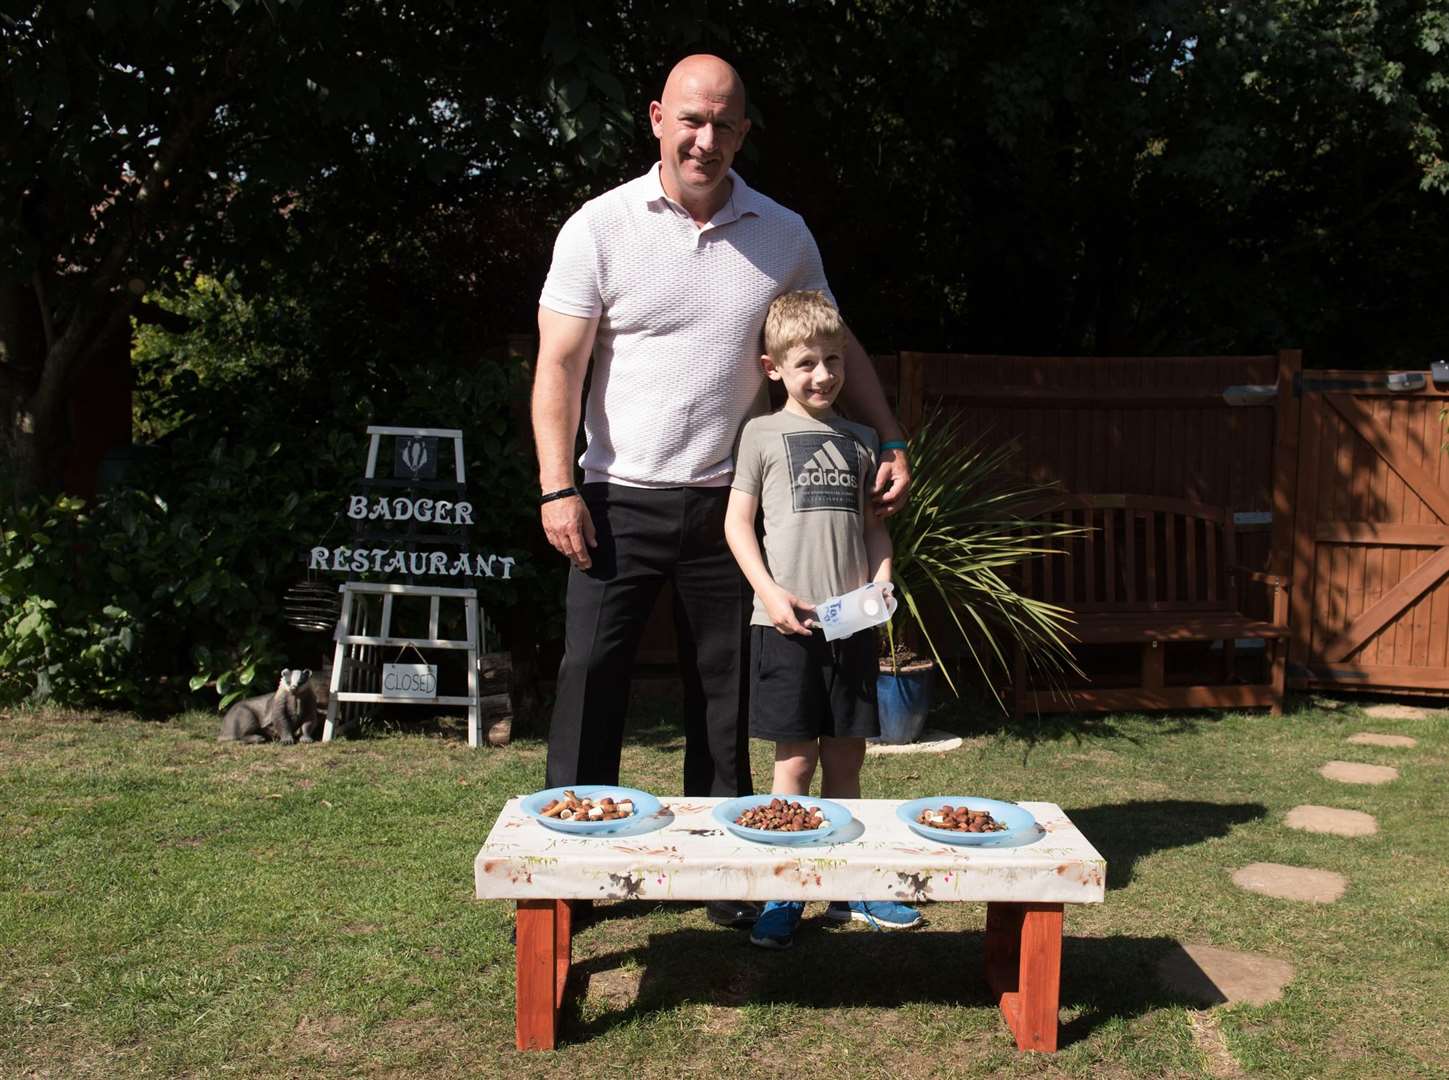 Marcel Payne and his son Lewis run a badger restaurant in their Bearsted garden. Picture: Georgie Gillard/Daily Mail